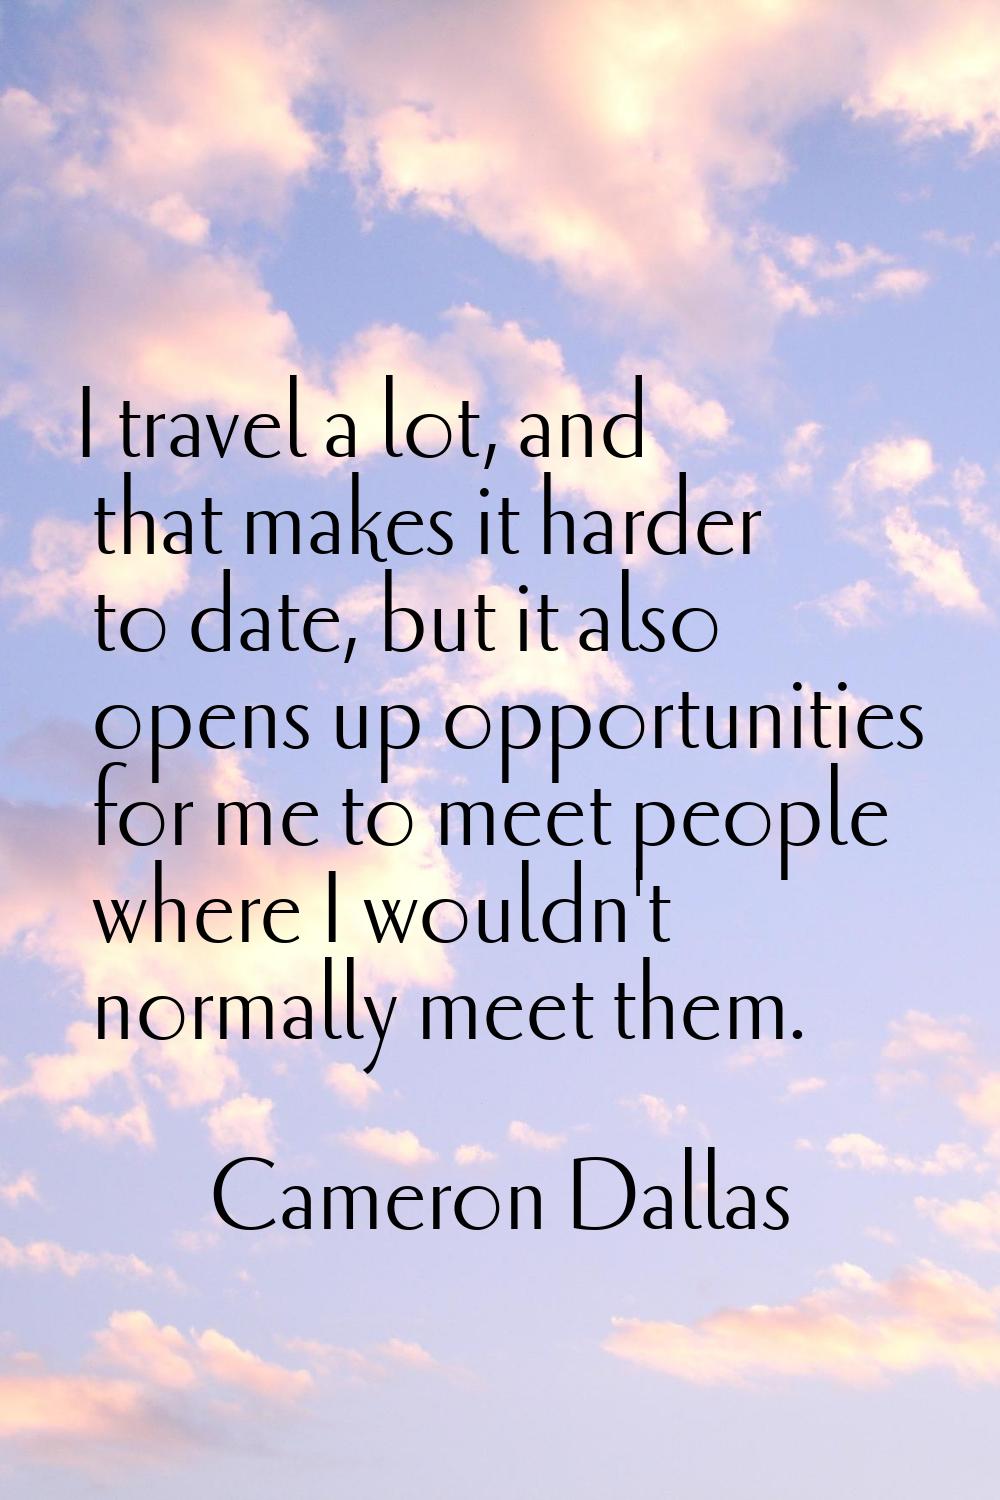 I travel a lot, and that makes it harder to date, but it also opens up opportunities for me to meet